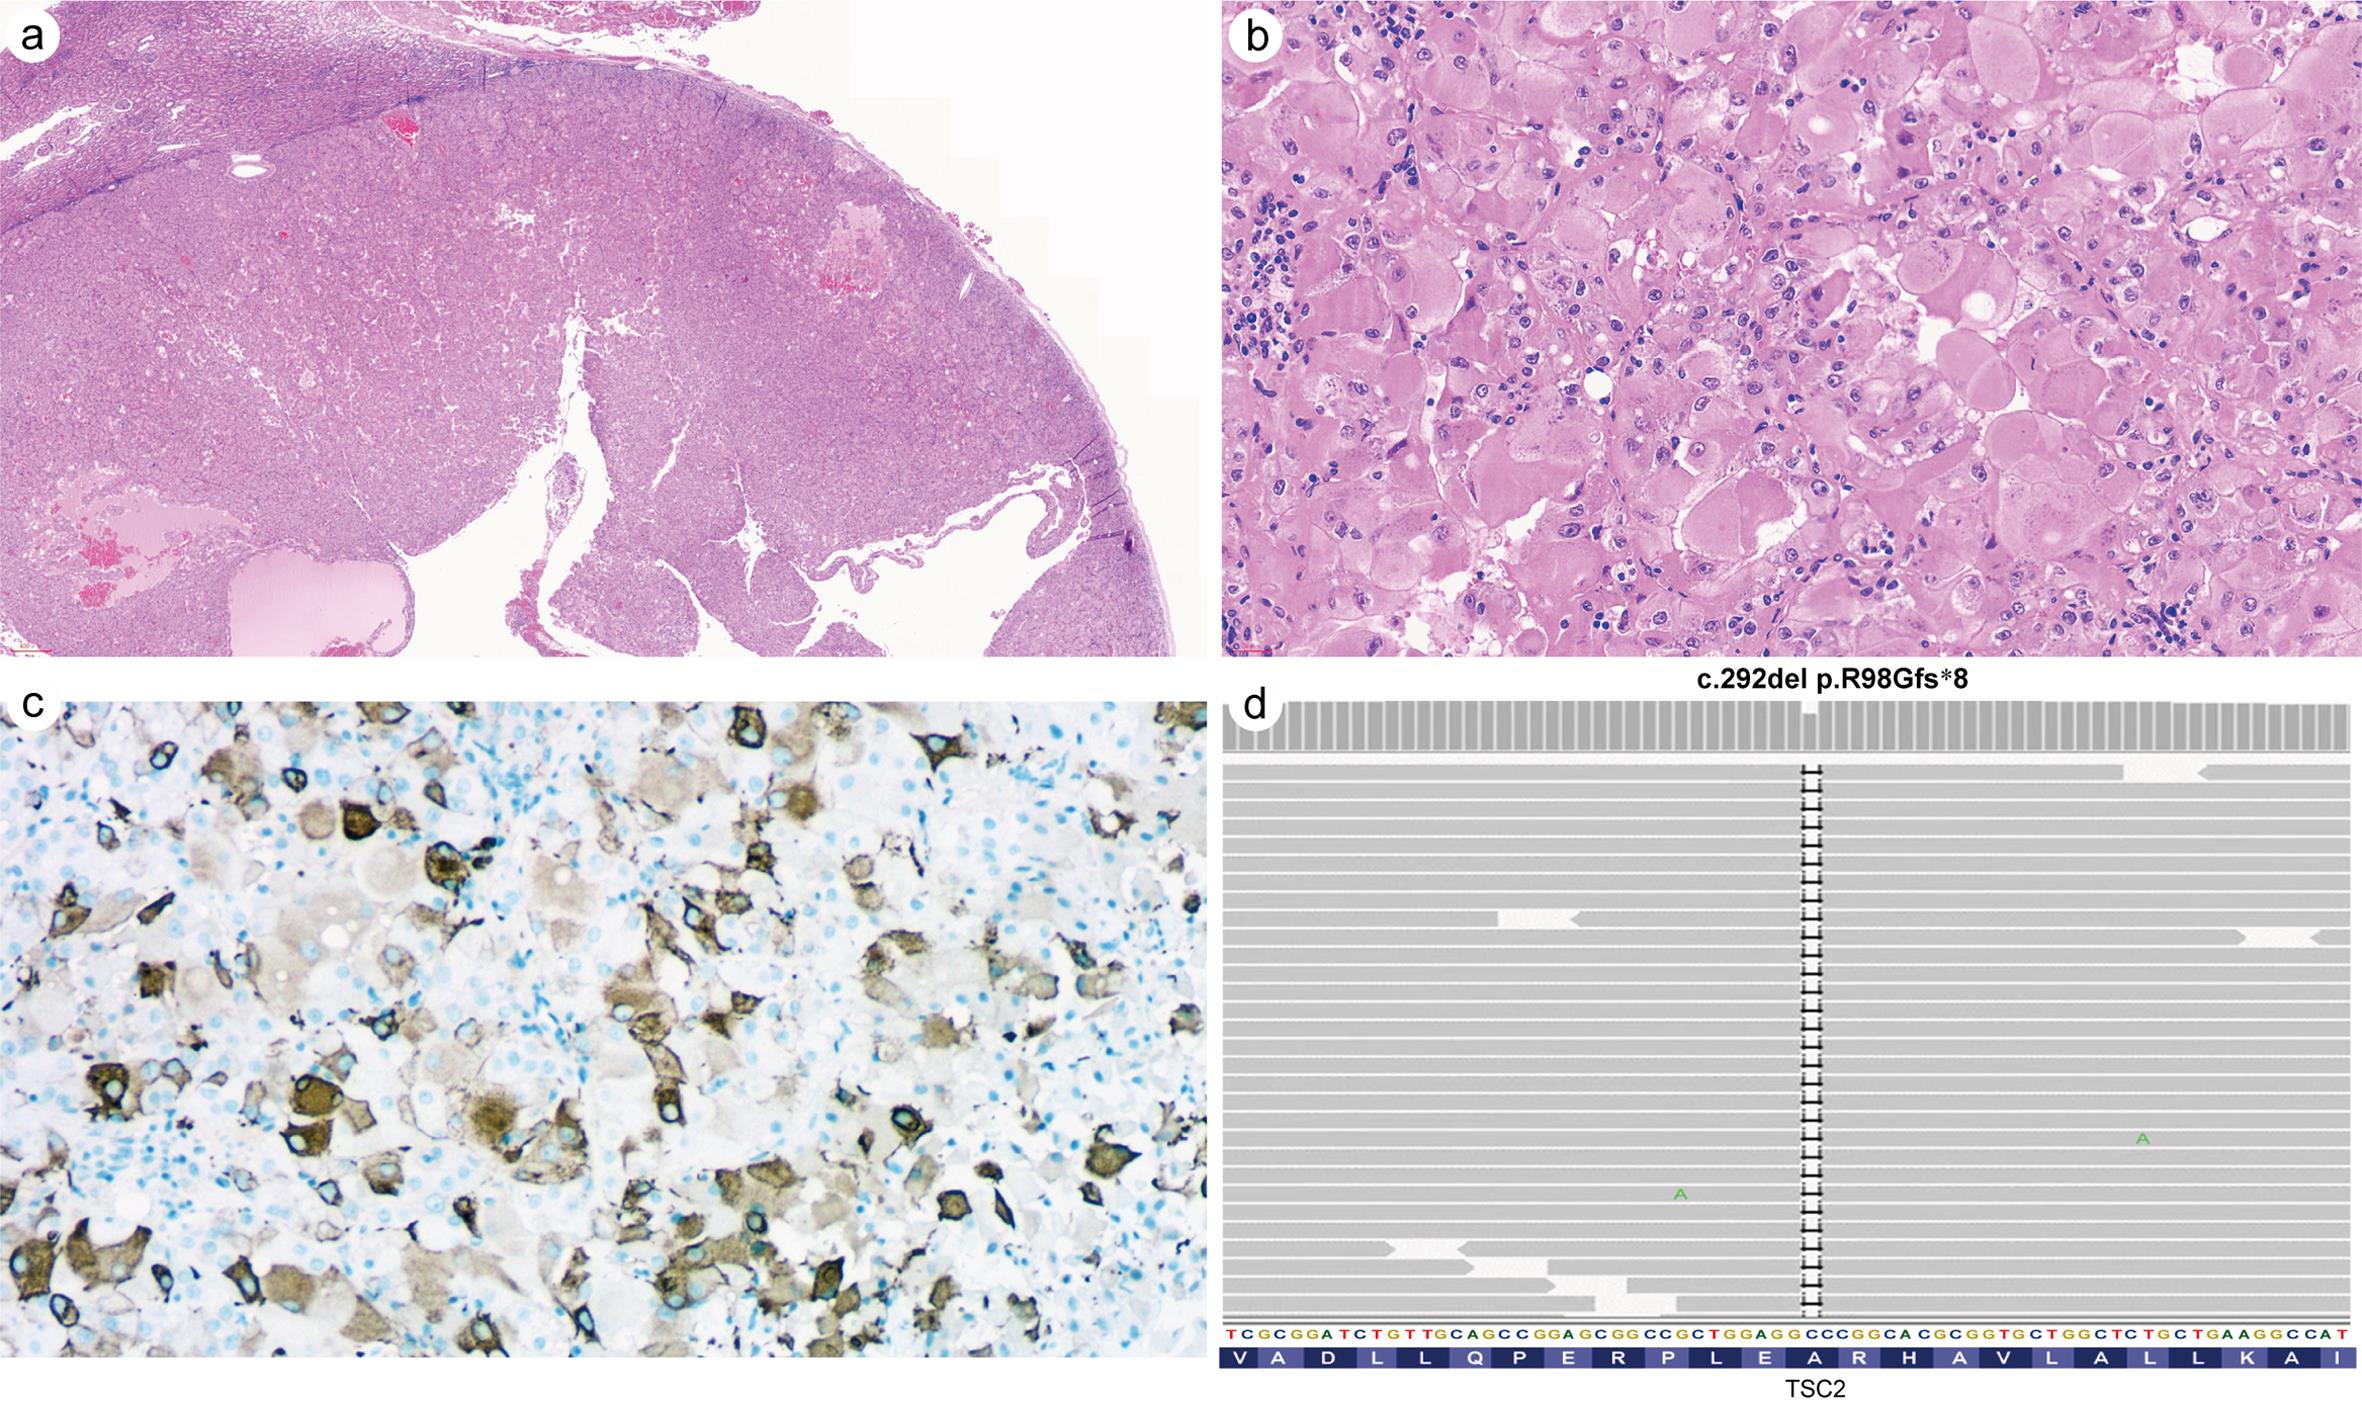 Eosinophilic solid and cystic renal cell carcinoma (ESC-RCC).